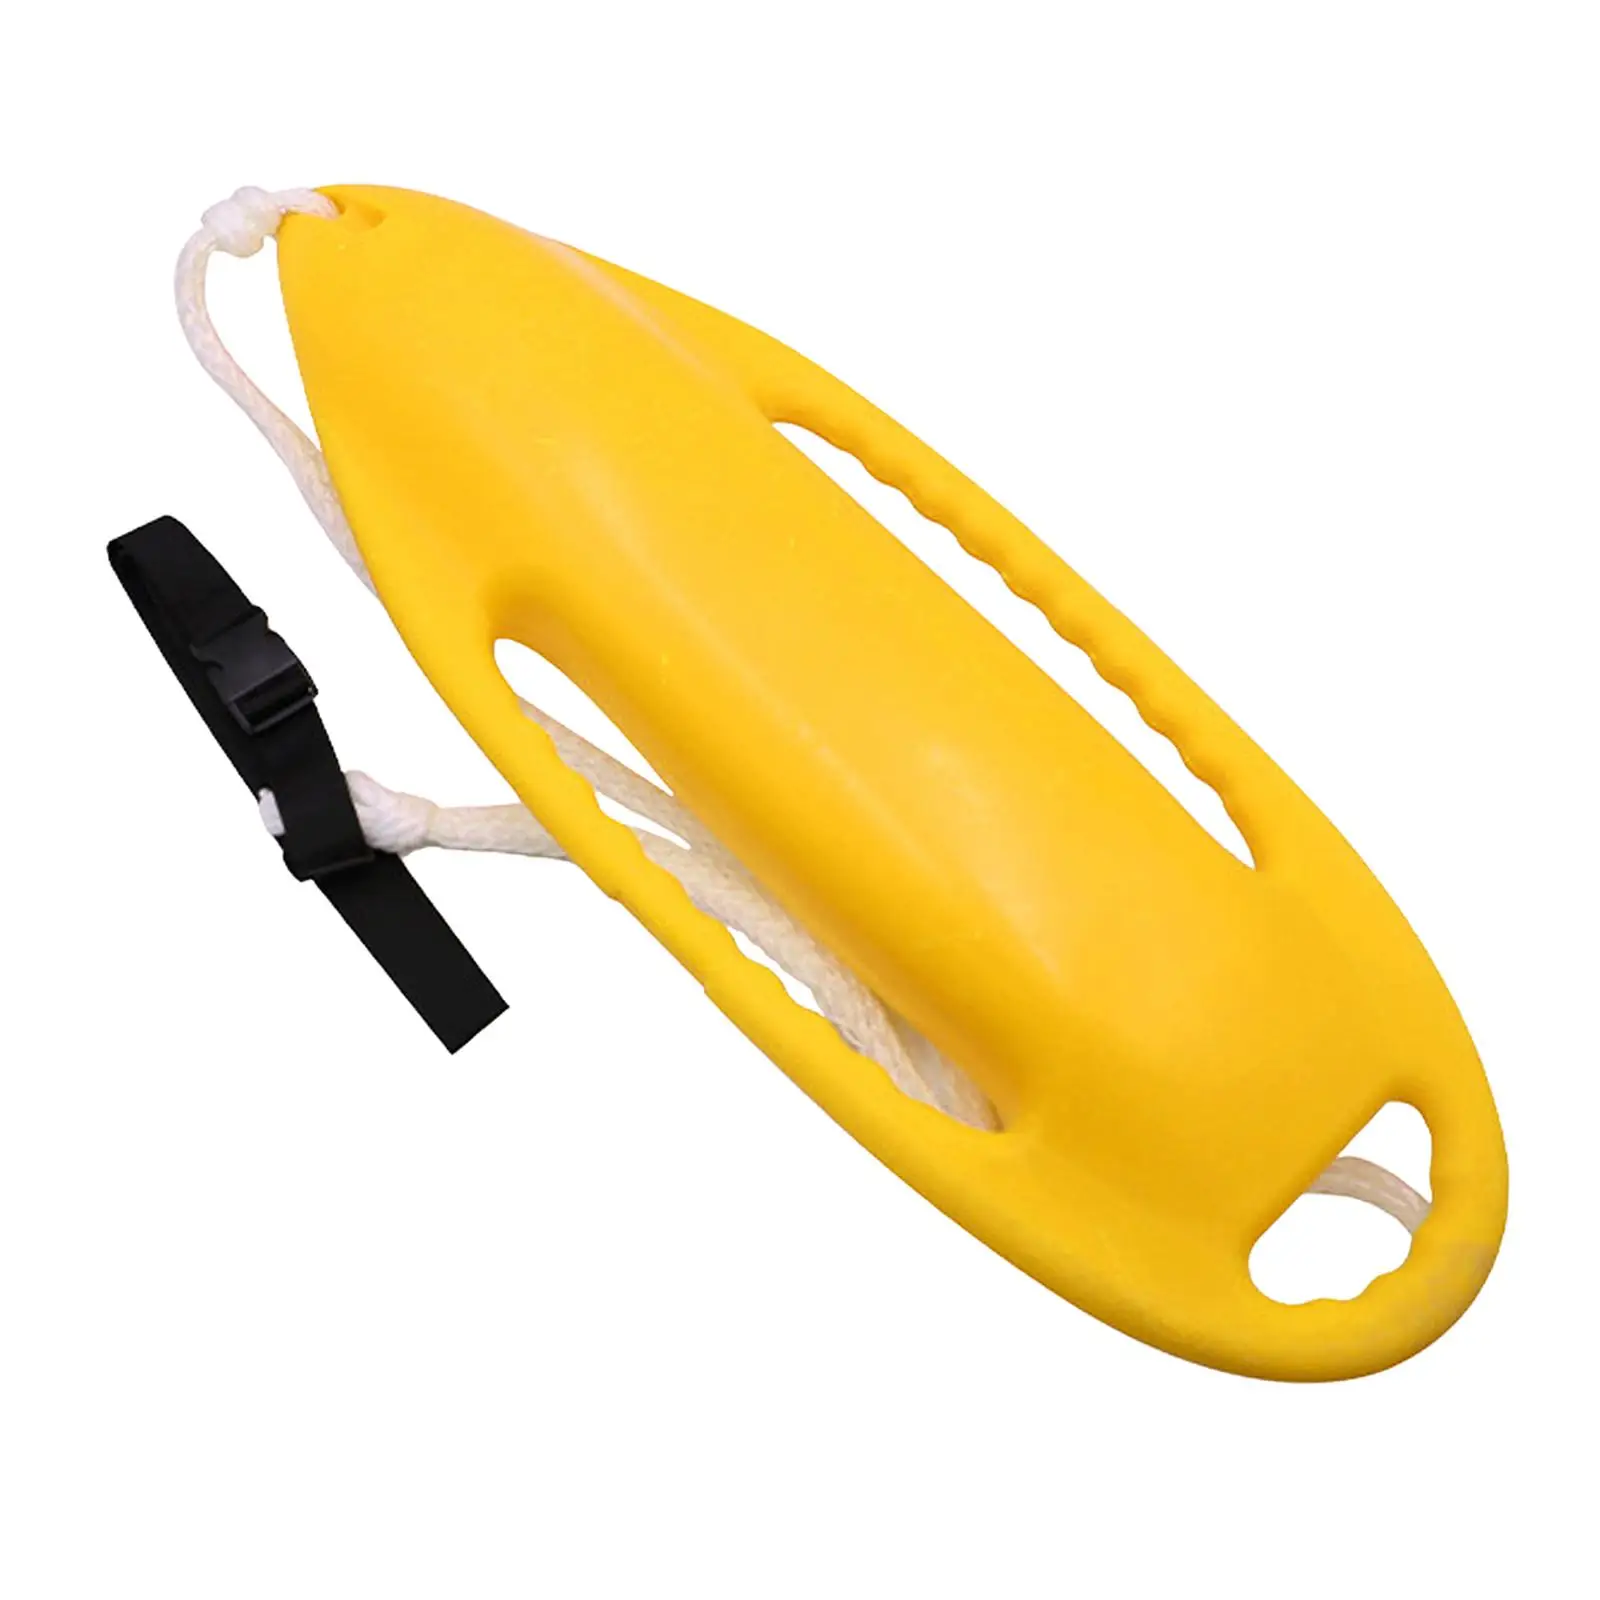 Rescue Can Floating Buoy Tube Swimming Equipment Free Inflatable with Adjustable Waist Belt